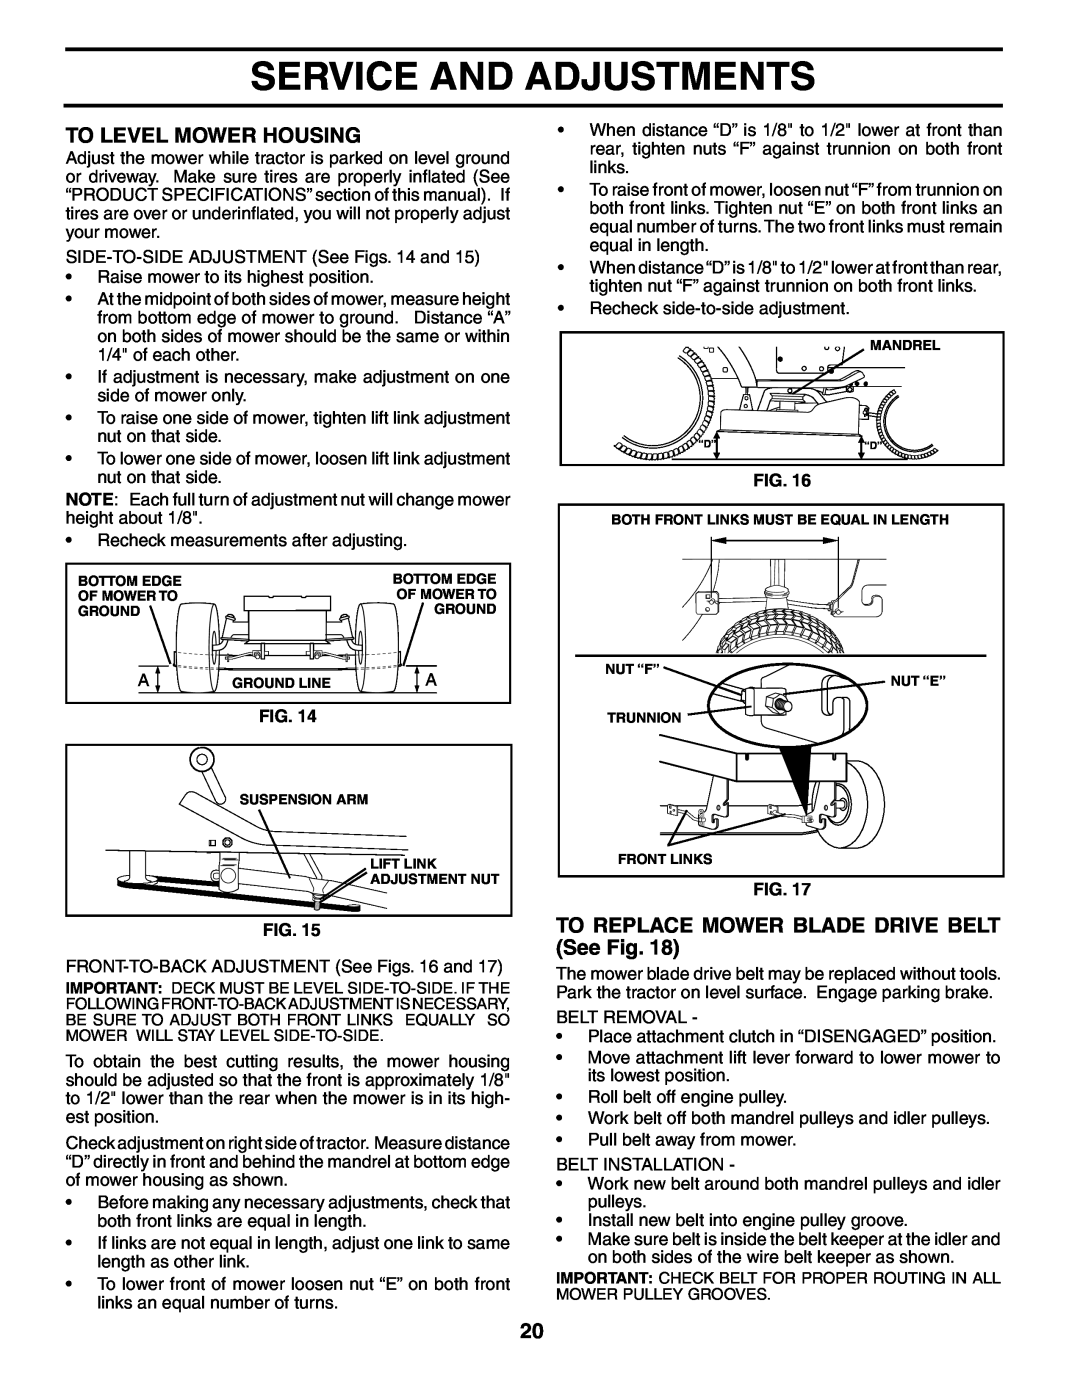 Poulan PB1638LT manual To Level Mower Housing, TO REPLACE MOWER BLADE DRIVE BELT See Fig, Service And Adjustments 